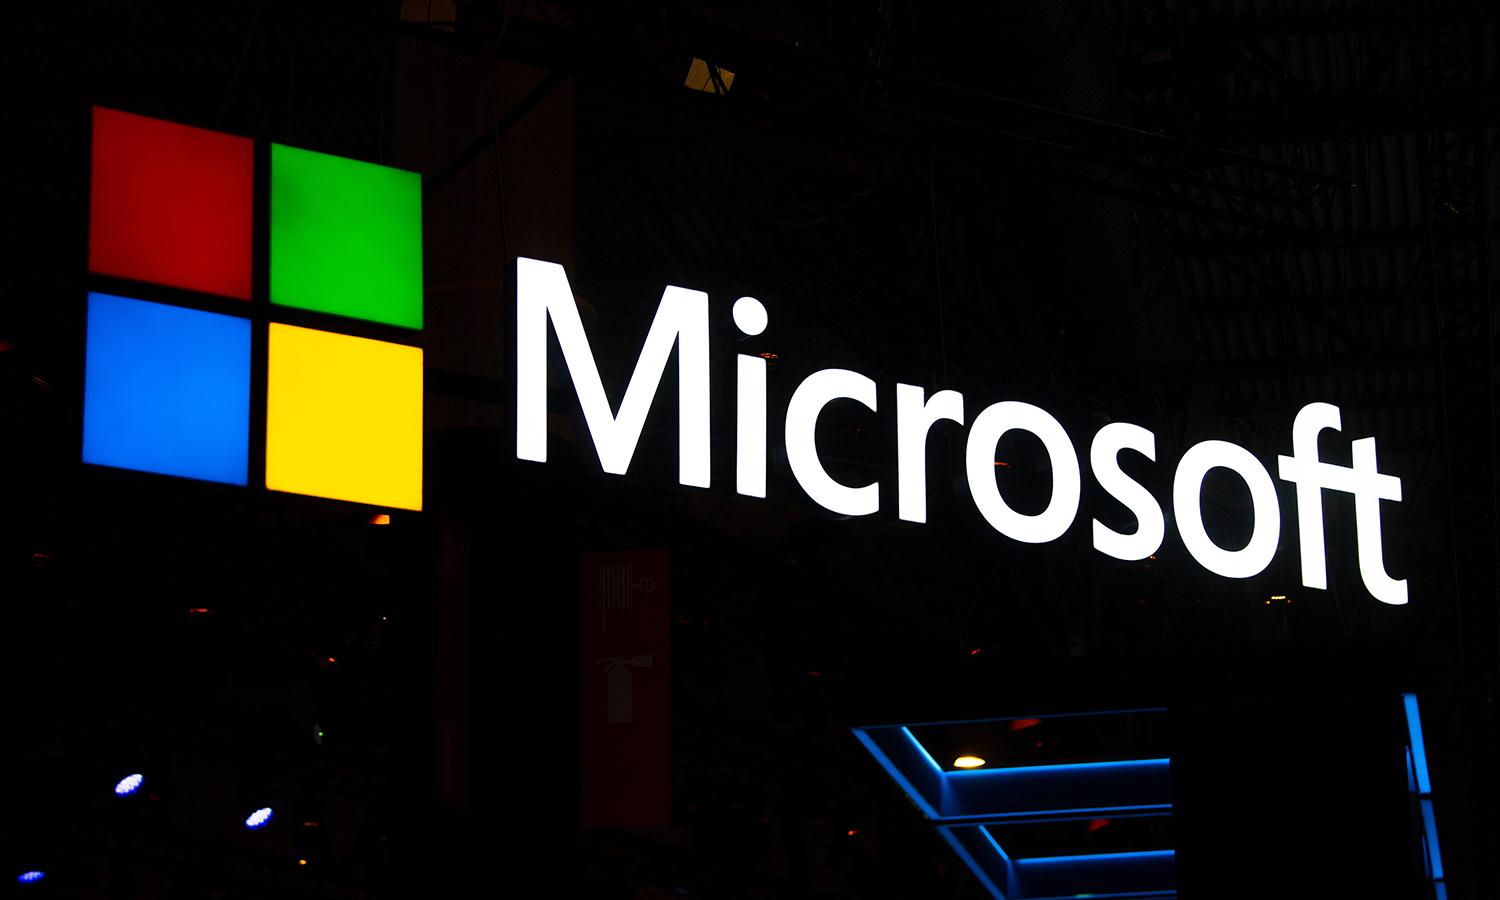 The Microsoft logo is illuminated at its booth at the GSMA Mobile World Congress 2019 on Feb. 26, 2019, in Barcelona, Spain. (Photo by David Ramos/Getty Images)